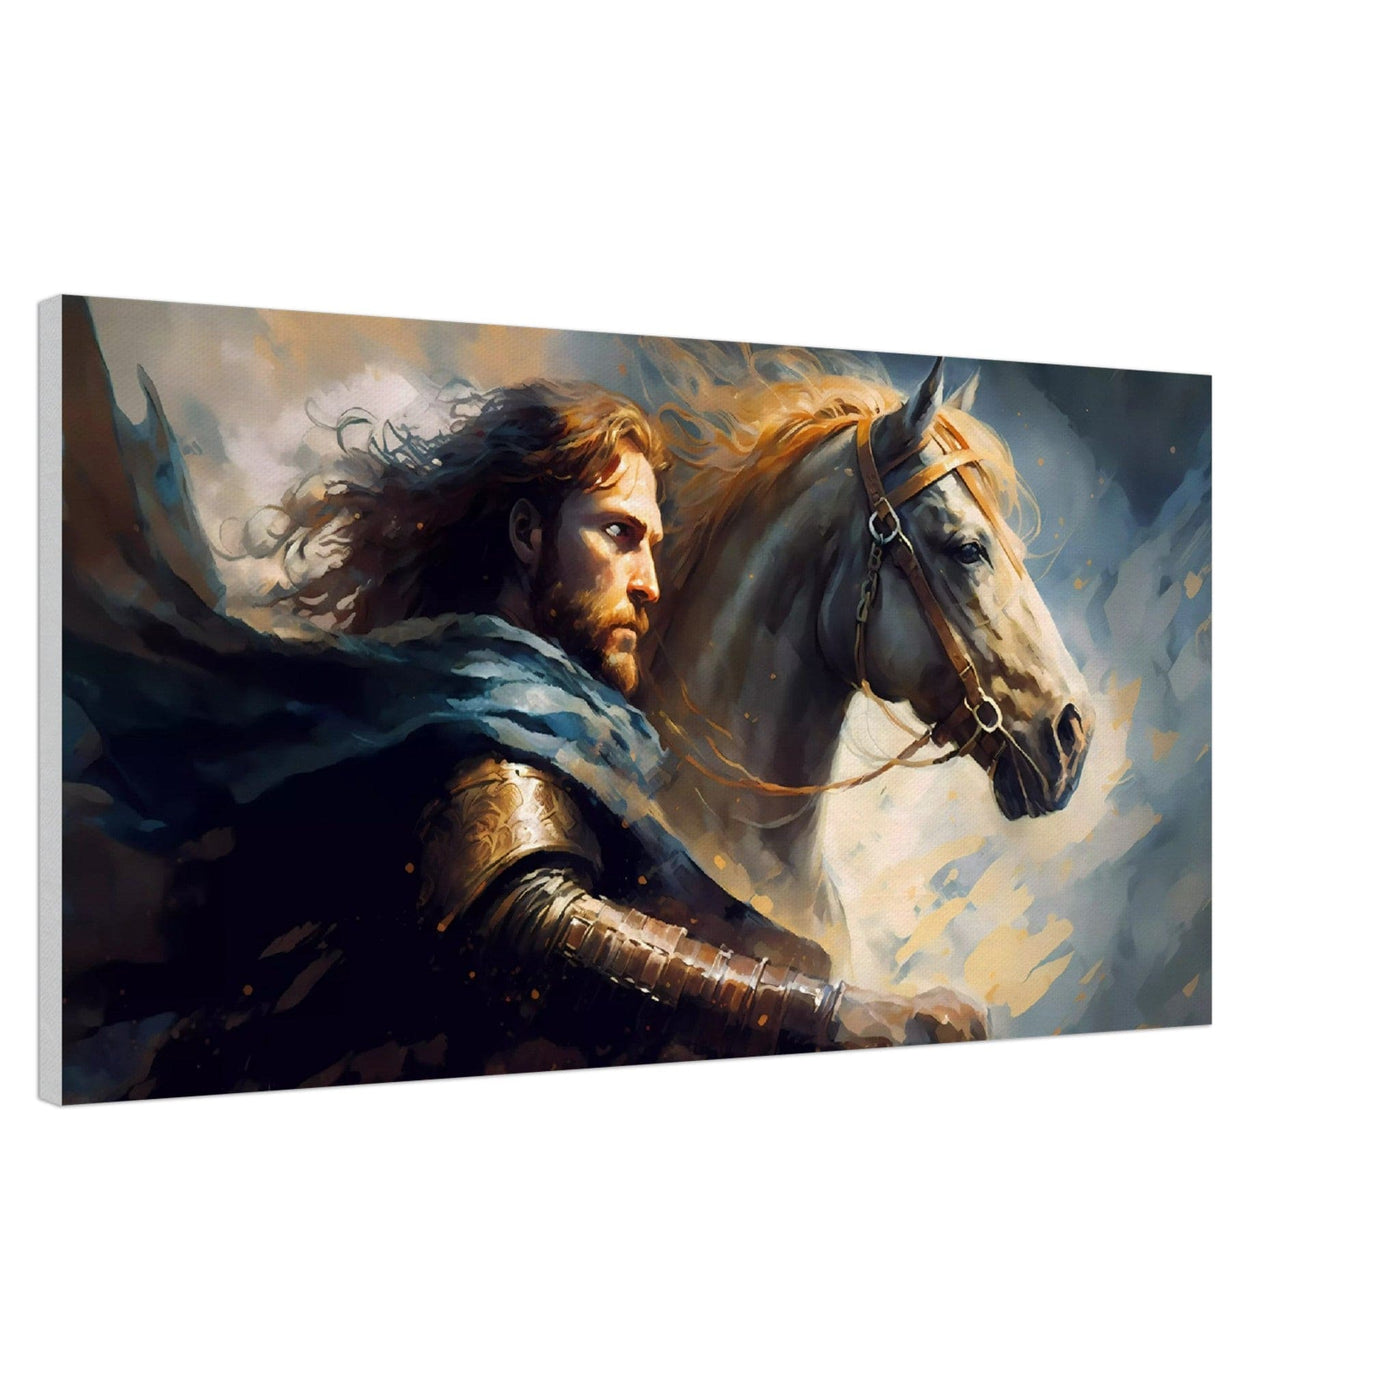 The Slayer of Grendel - Oil Painting Printed Canvas. 50X100.